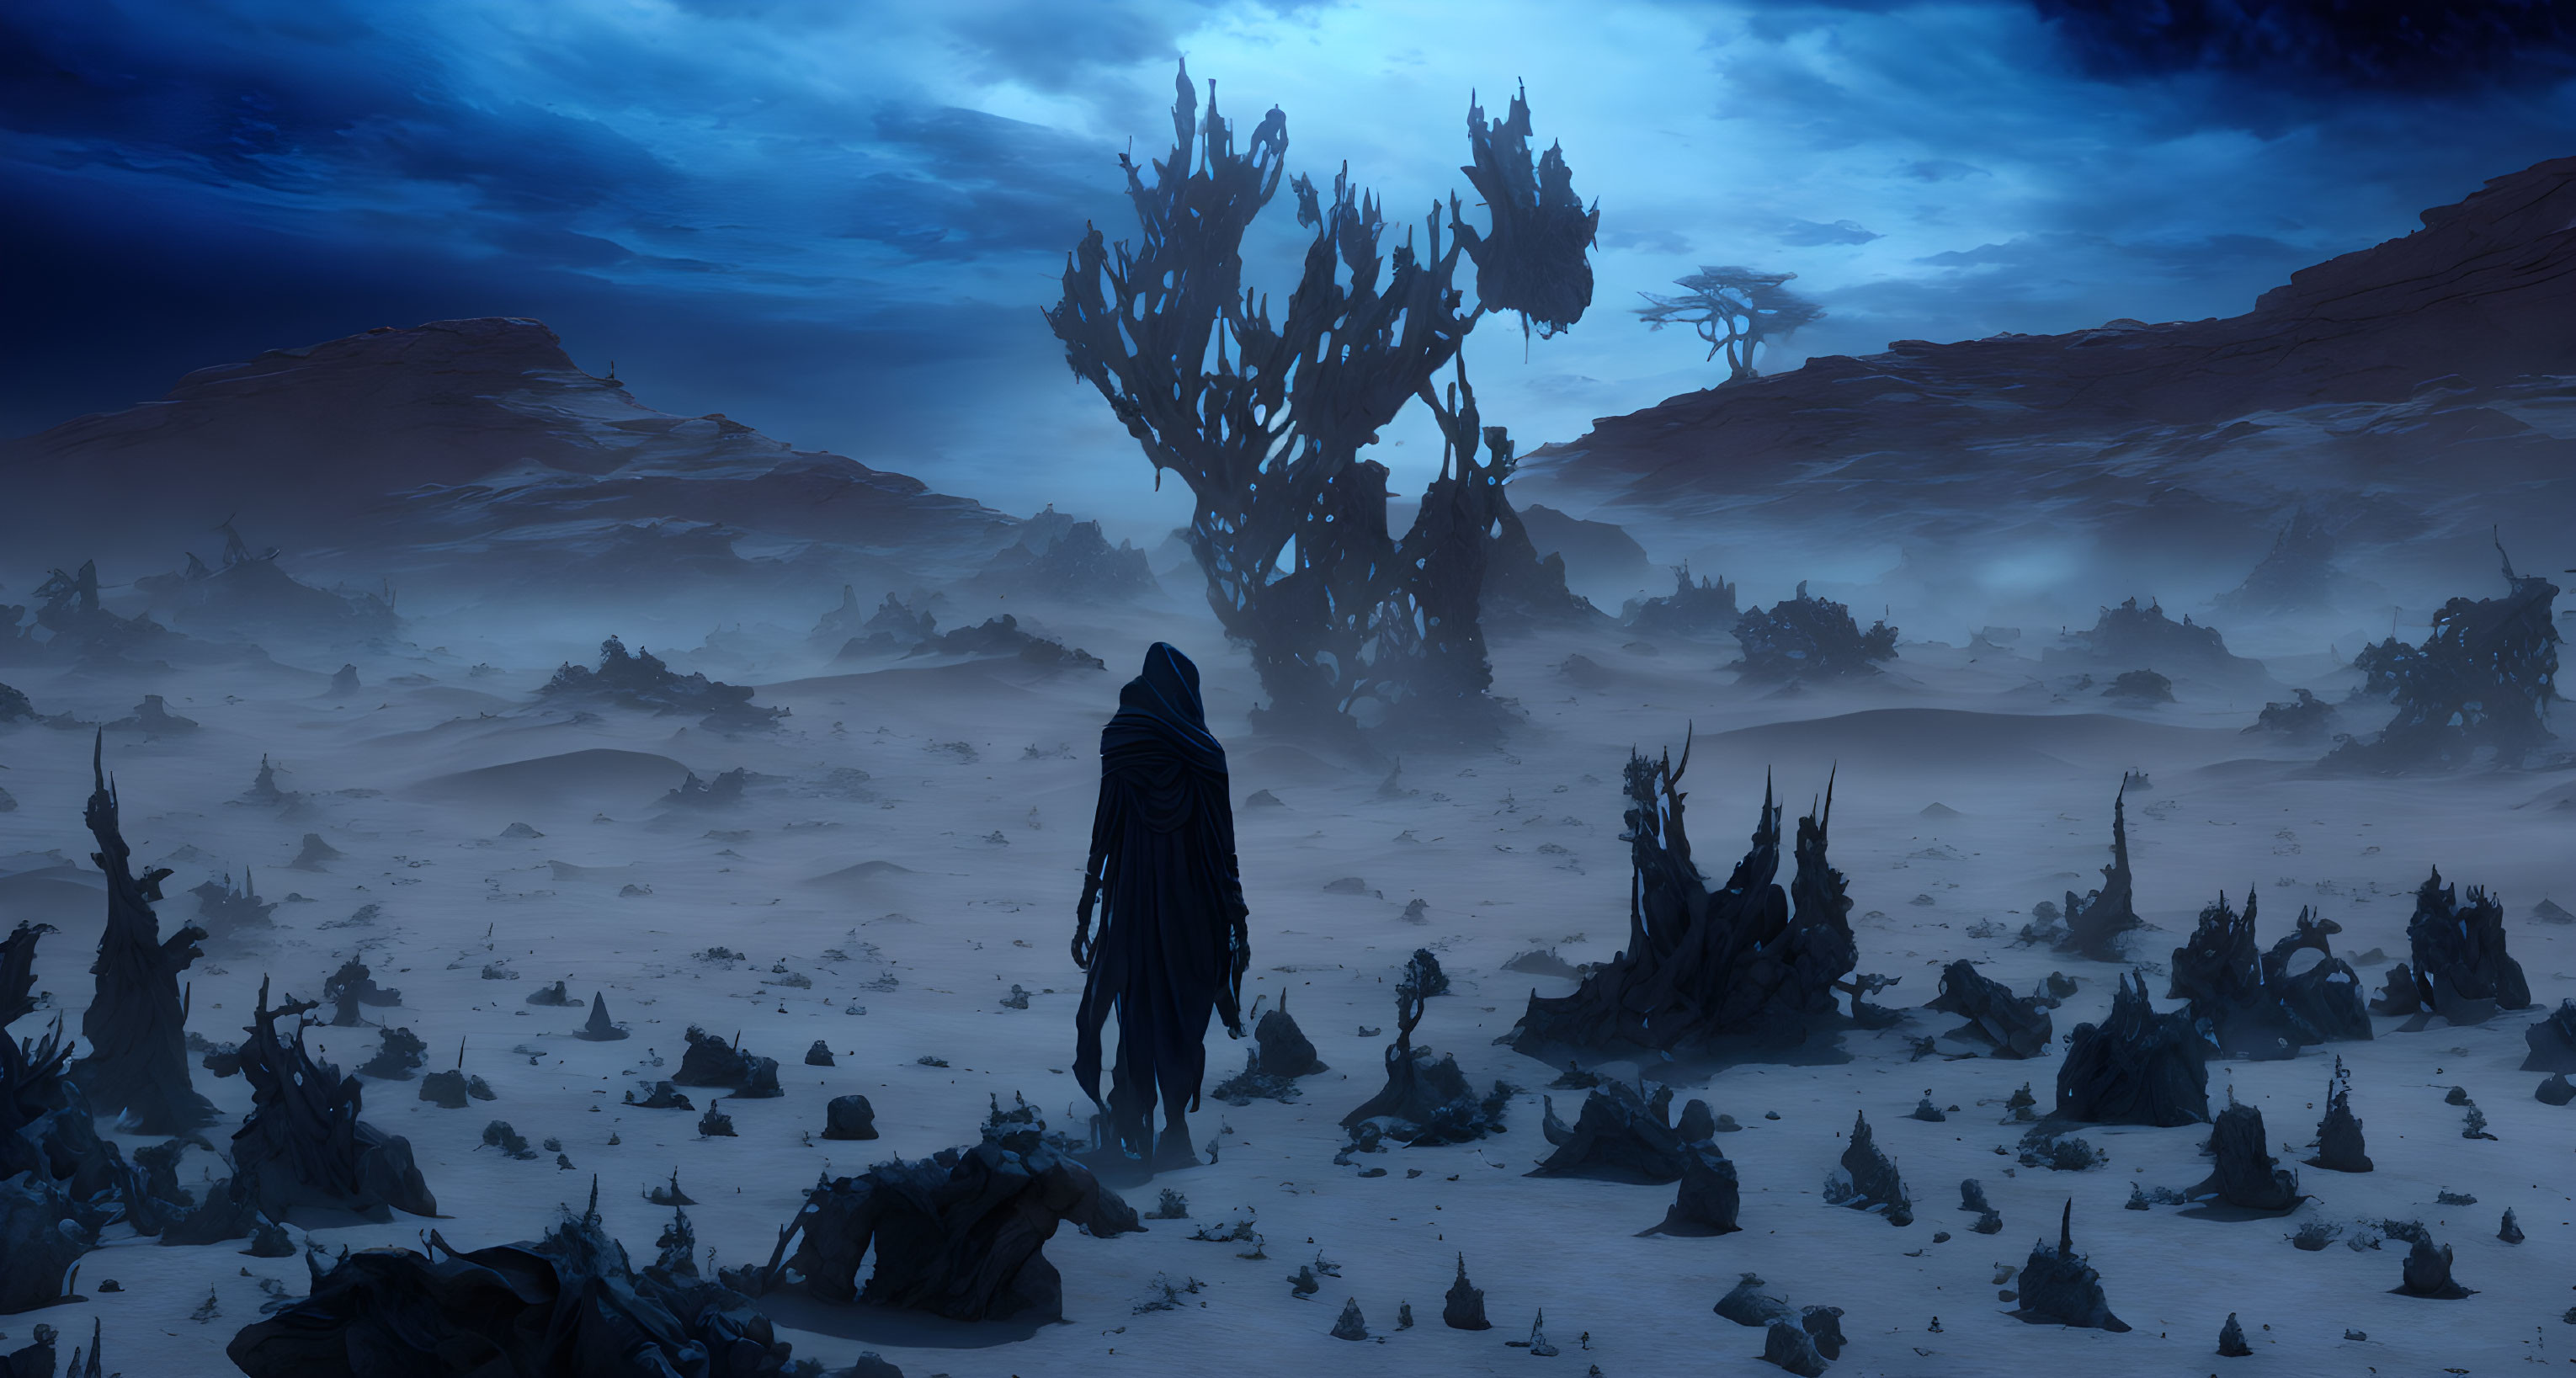 Cloaked Figure in Desolate Blue Landscape with Tree